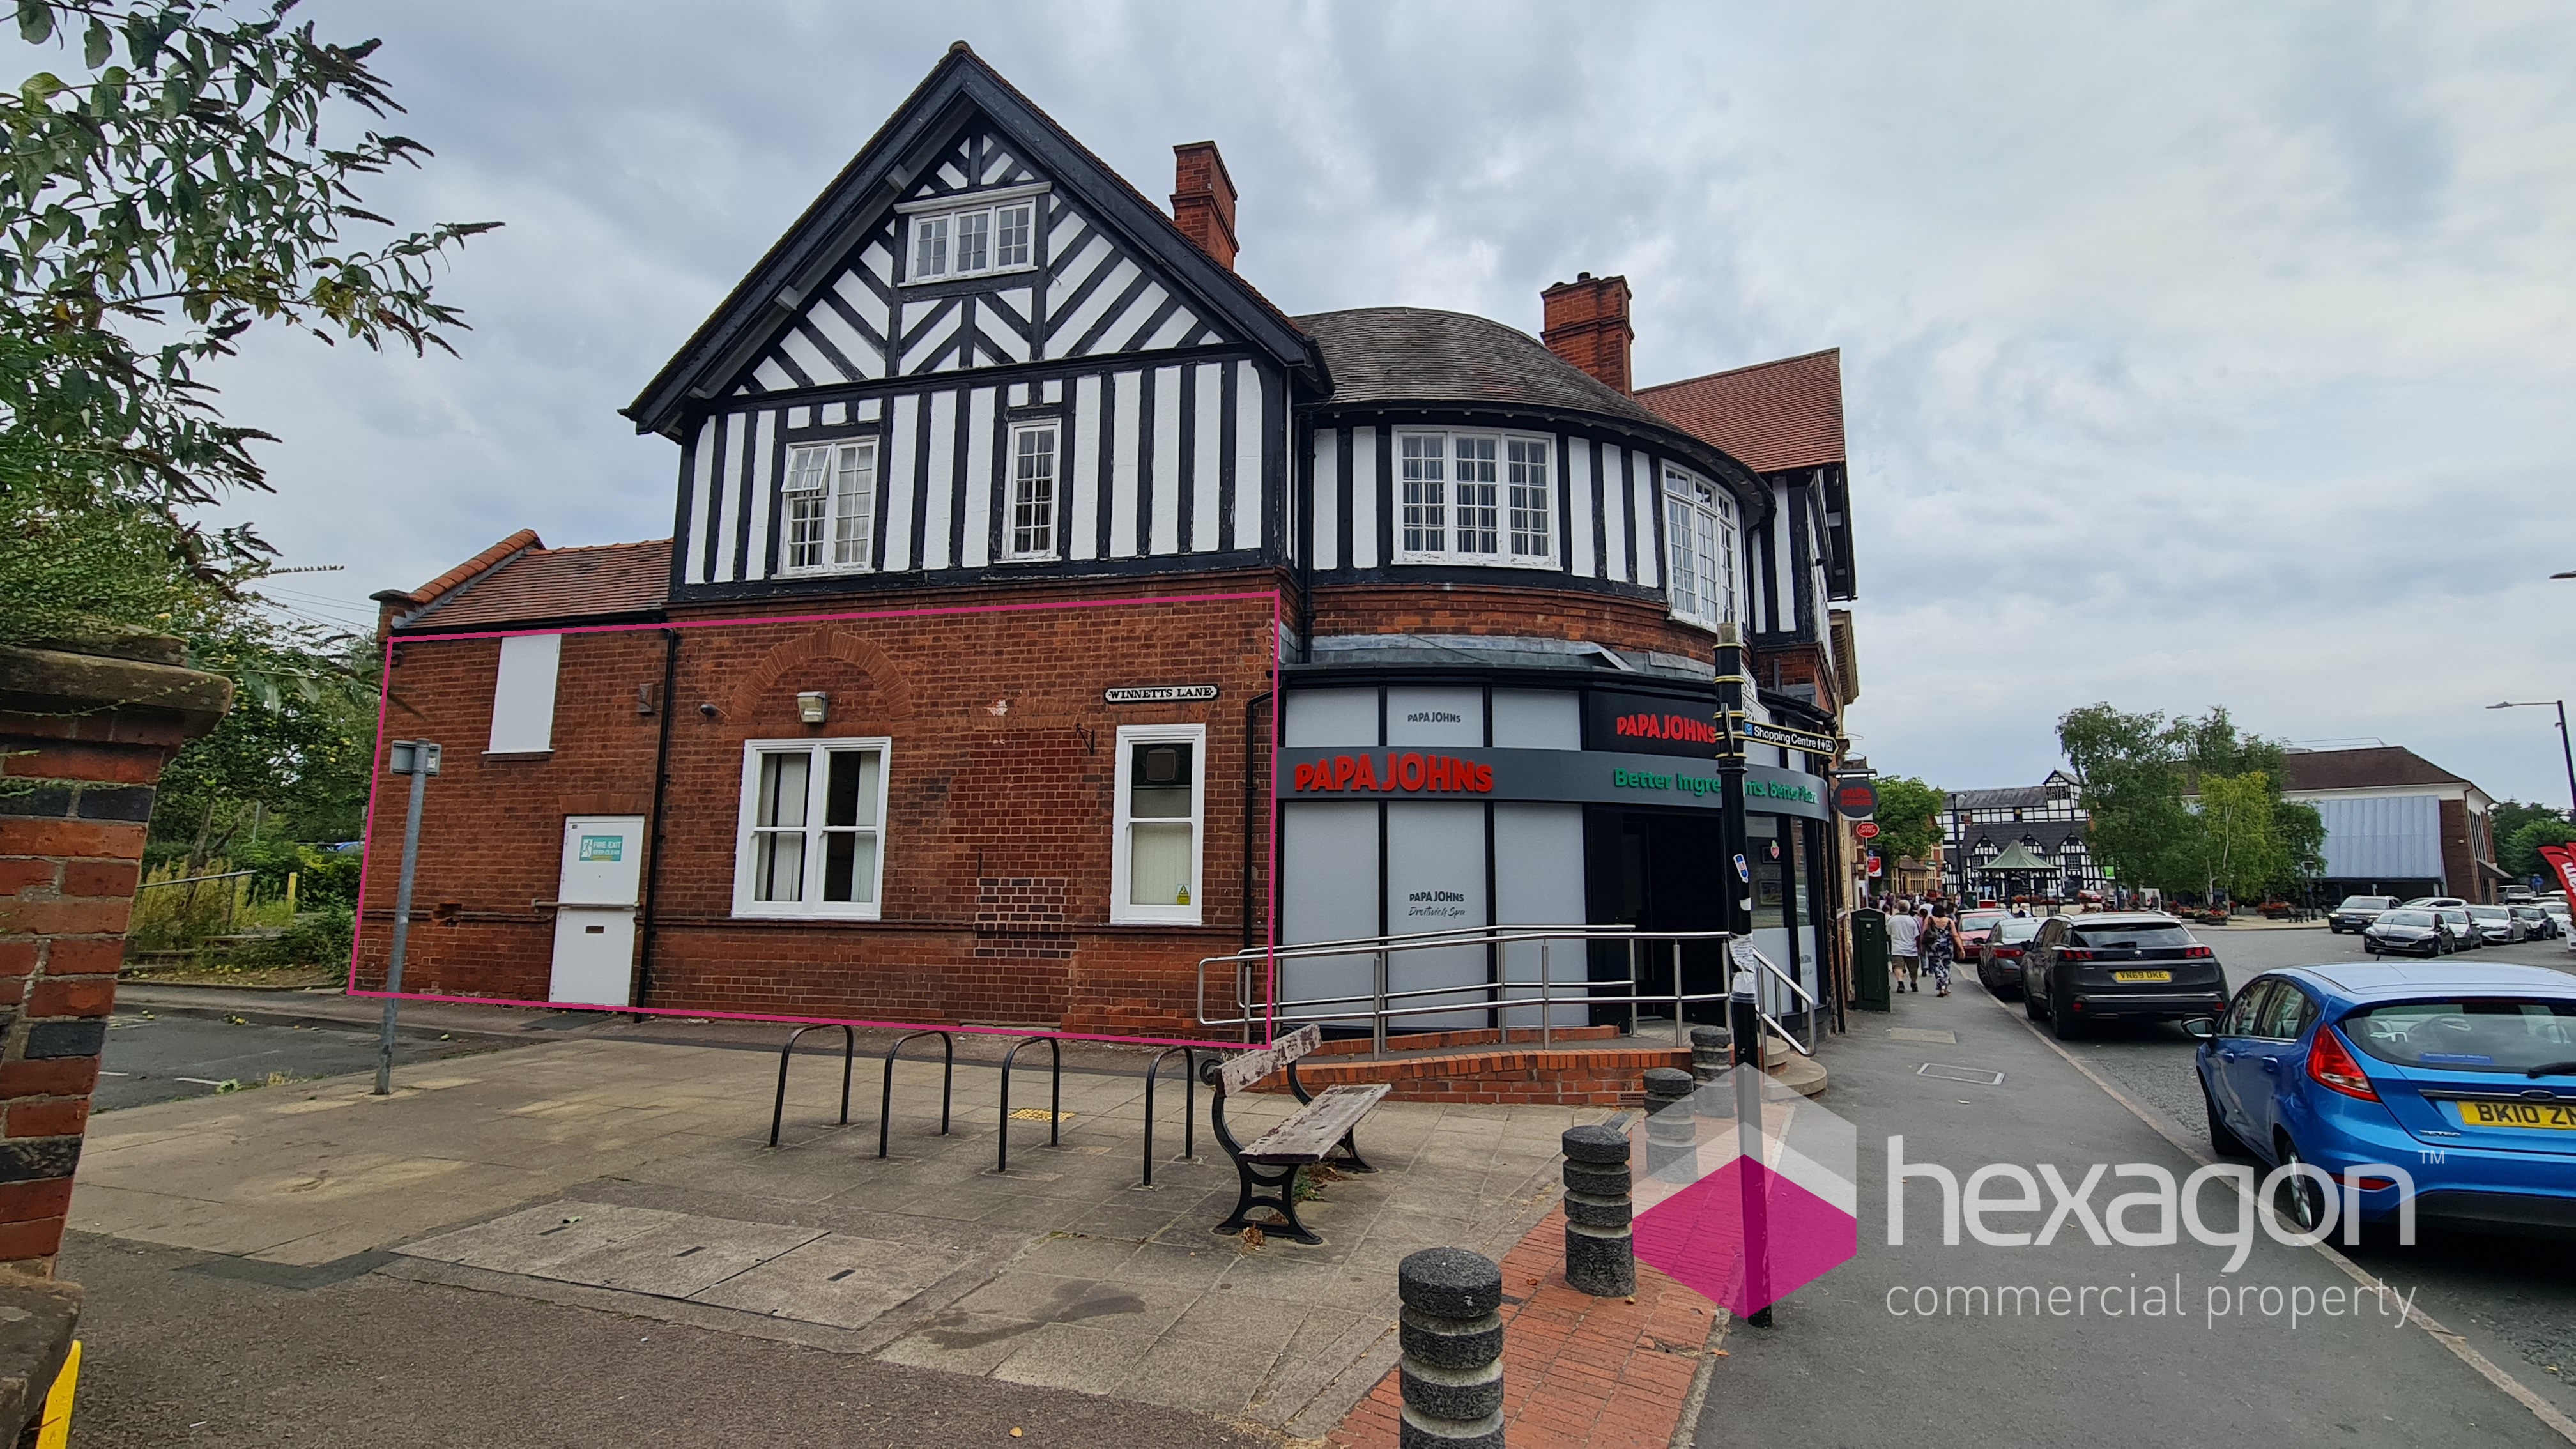 Retail Property (High Street) for rent in Droitwich. From Hexagon Commercial Property